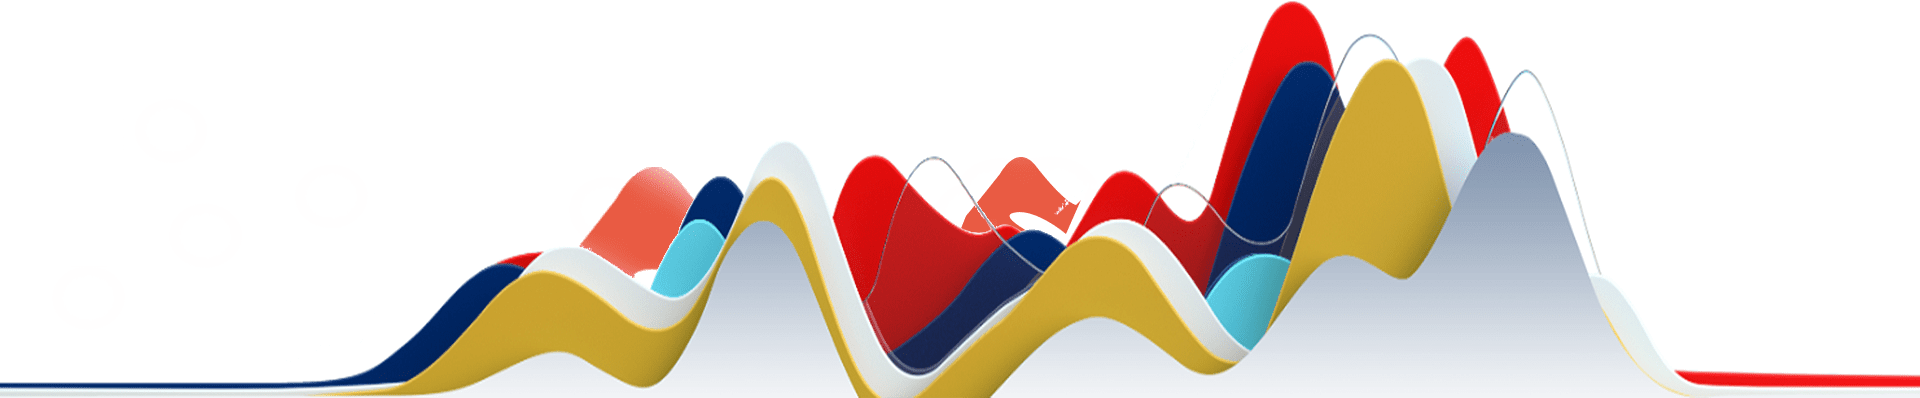 Colored 3d line graph with yellow, dark blue, red, aqua and white troughs and peaks of a graph